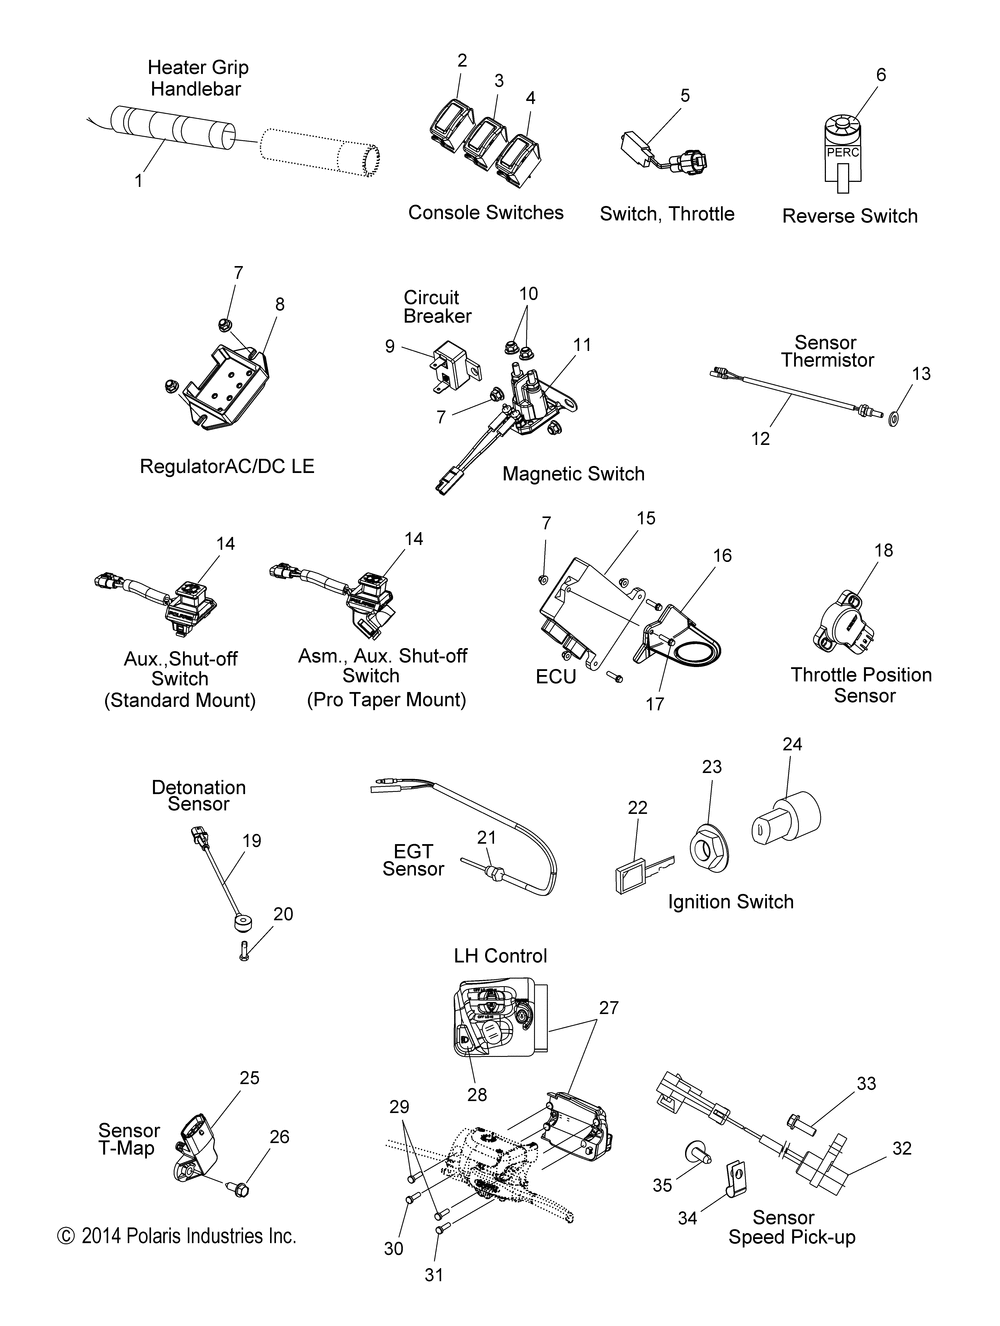 Electrical switches sensors and components - s15cc6_ck6_cm6 all options